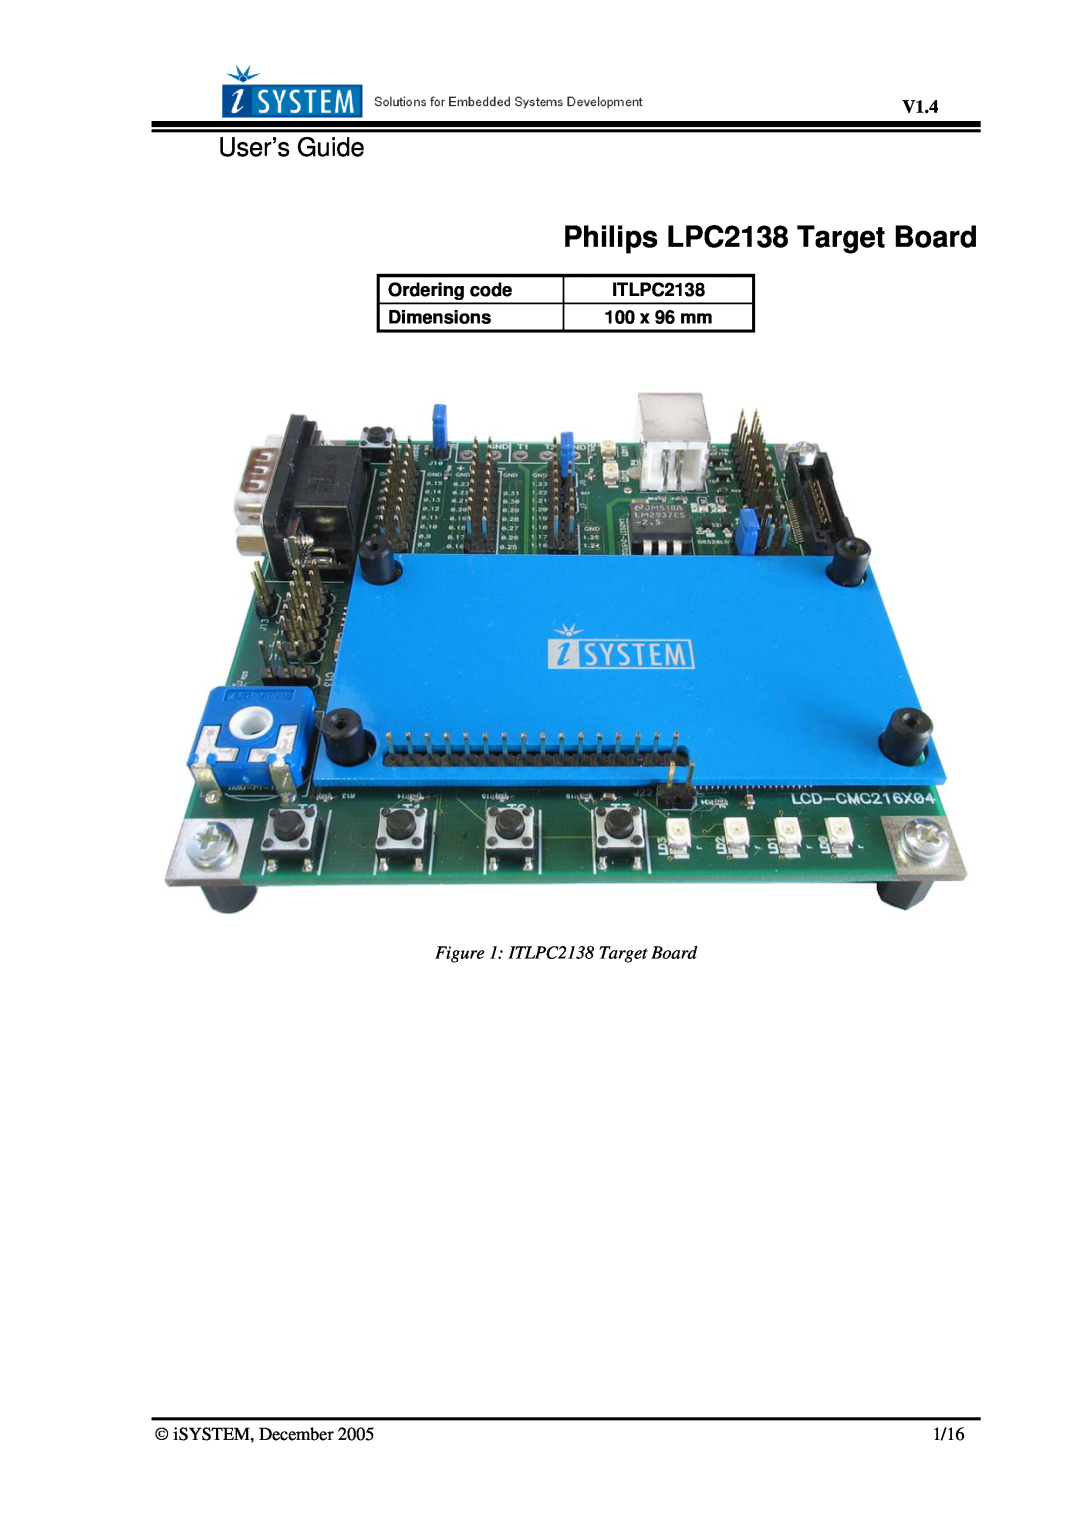 Philips dimensions User’s Guide, Philips/NXP LPC2138 Target Board, Ordering code, ITLPC2138, Dimensions, 100 x 96 mm 